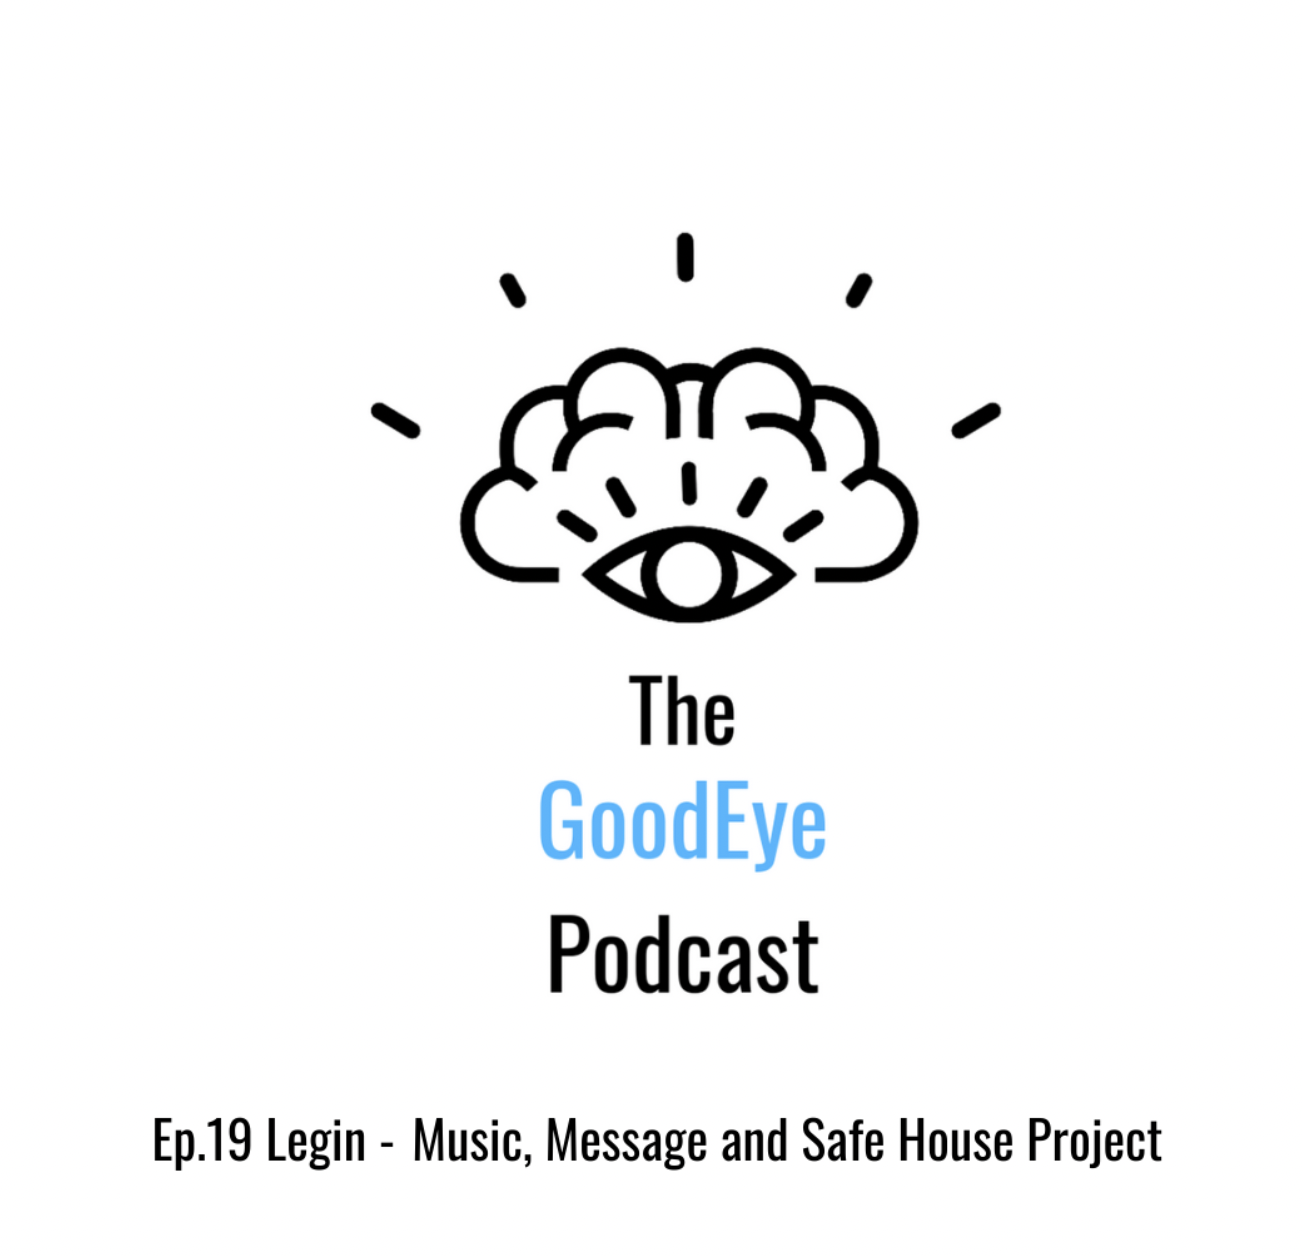 Good Eye Podcast – Ep.19 Legin – Music, Message, Safe House Project